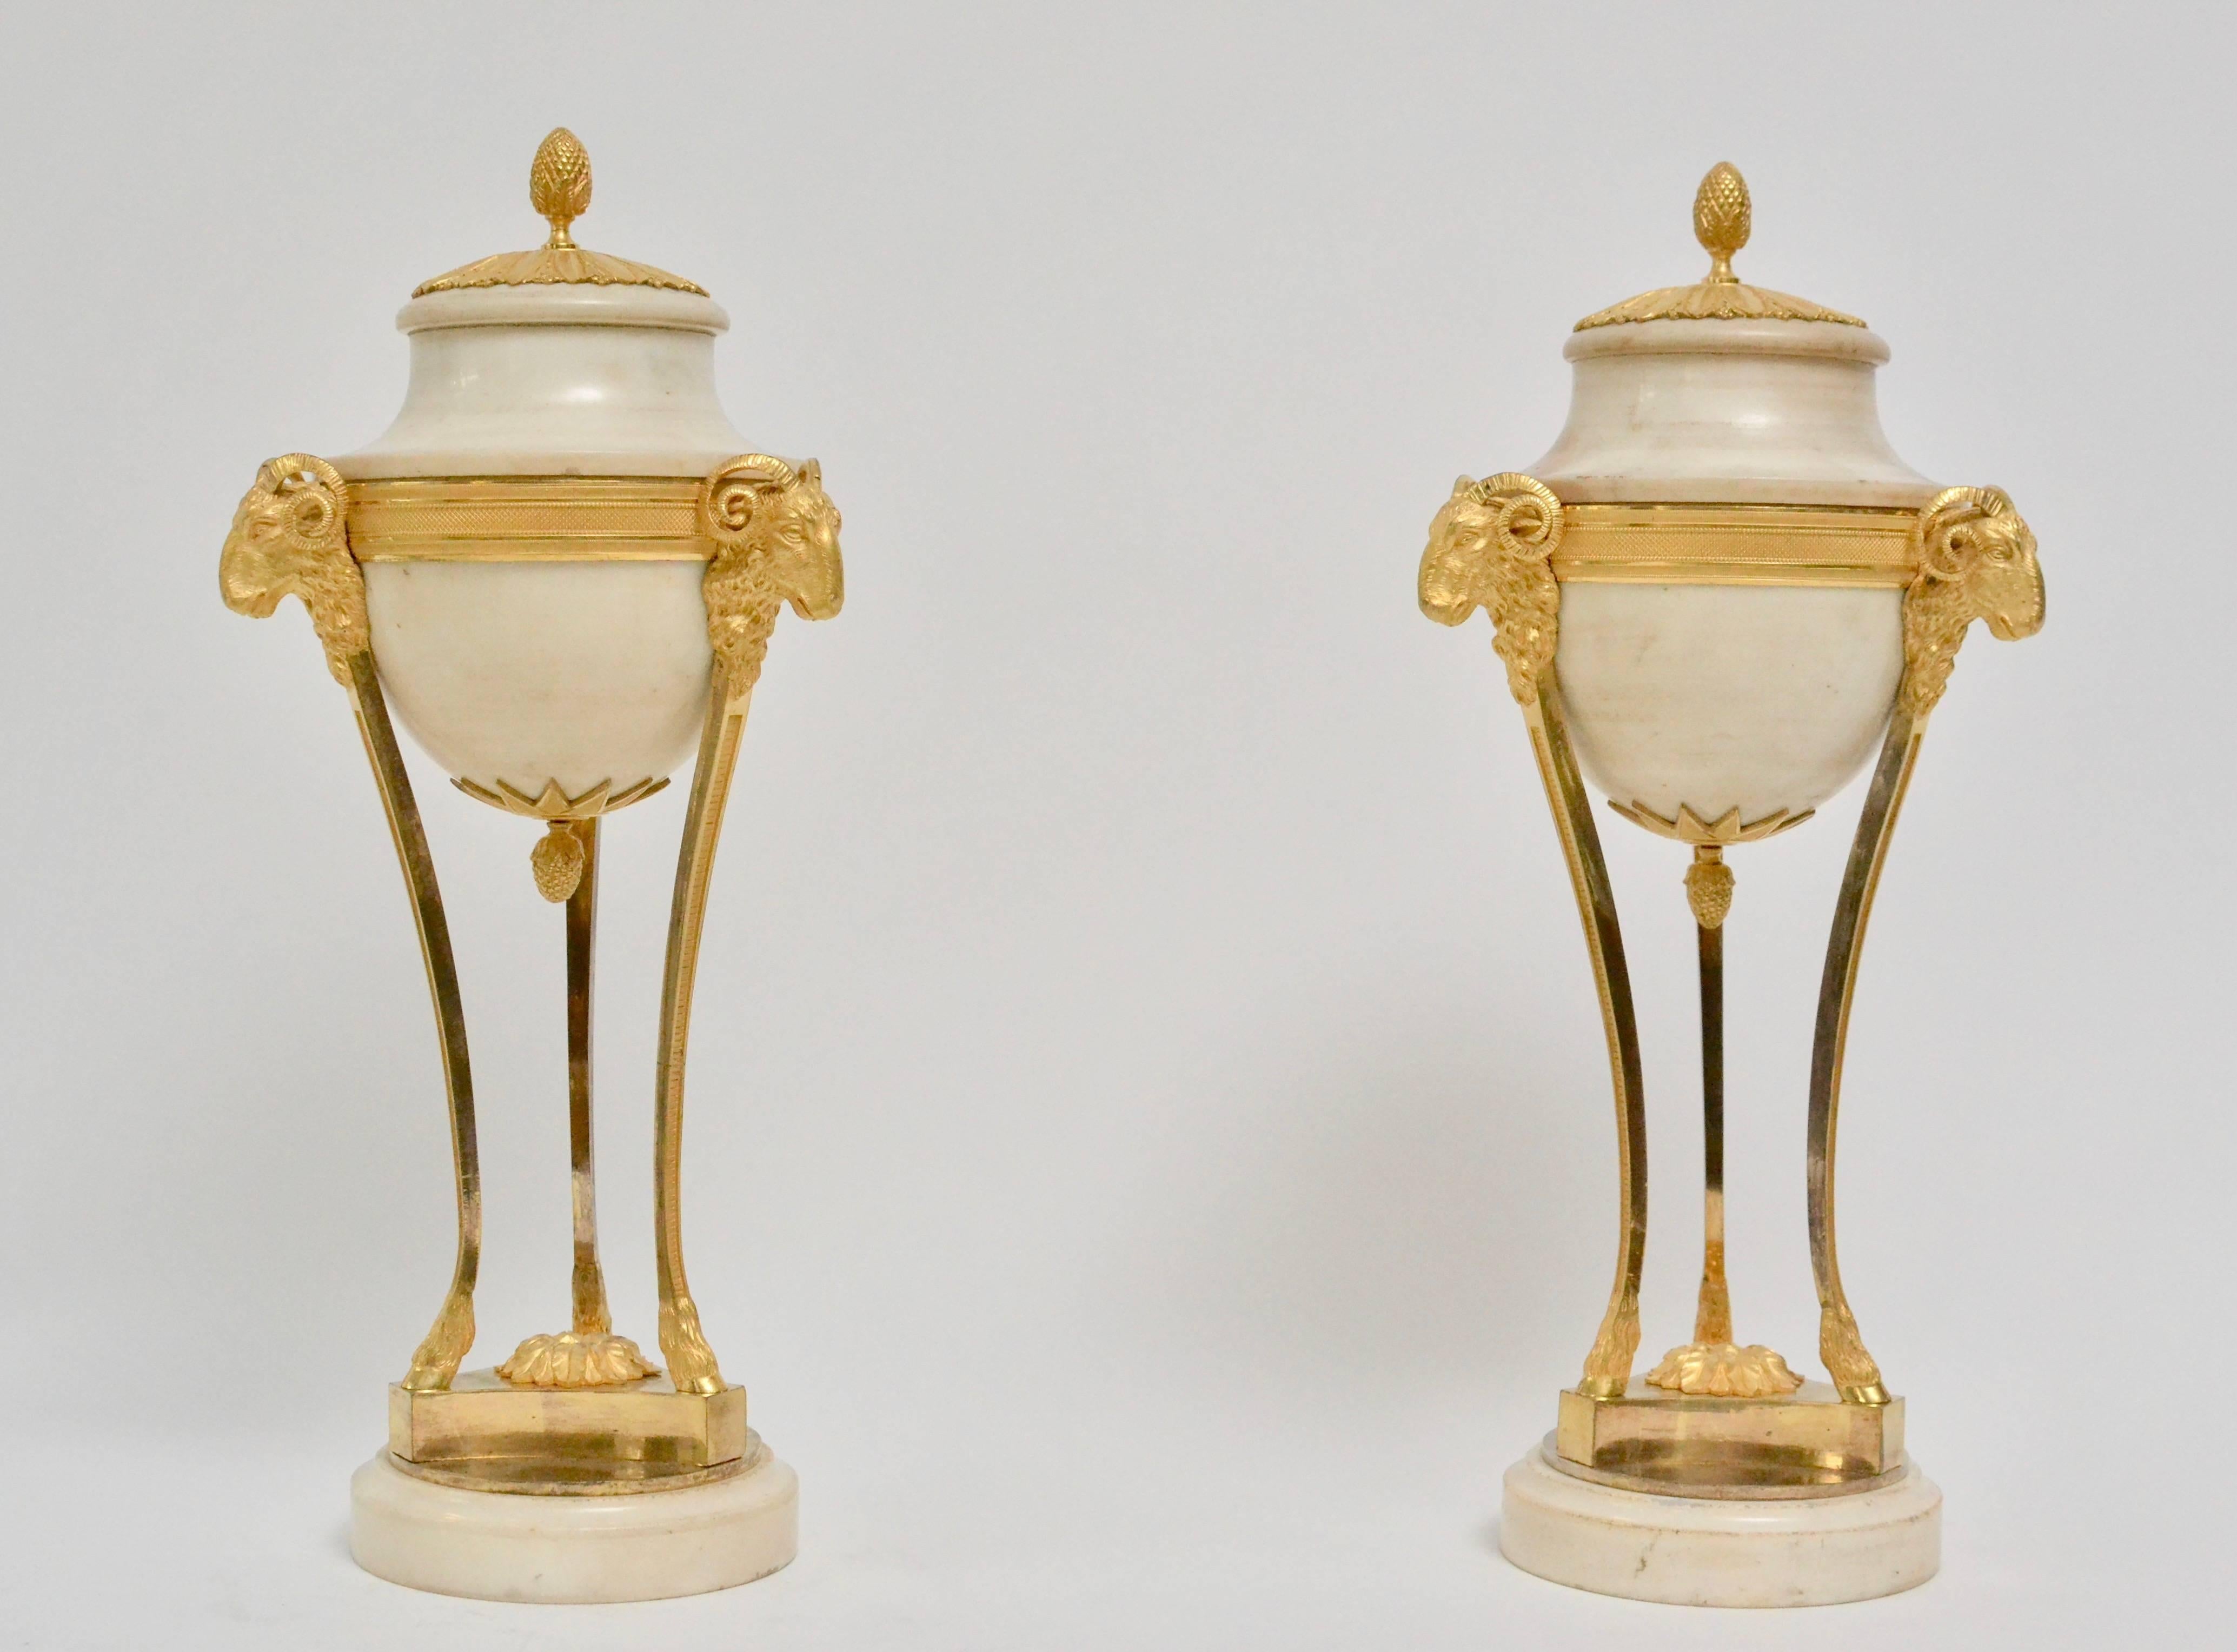 A fine pair of Louis XVI gilt bronze and white marble bronzes, late 18th century.